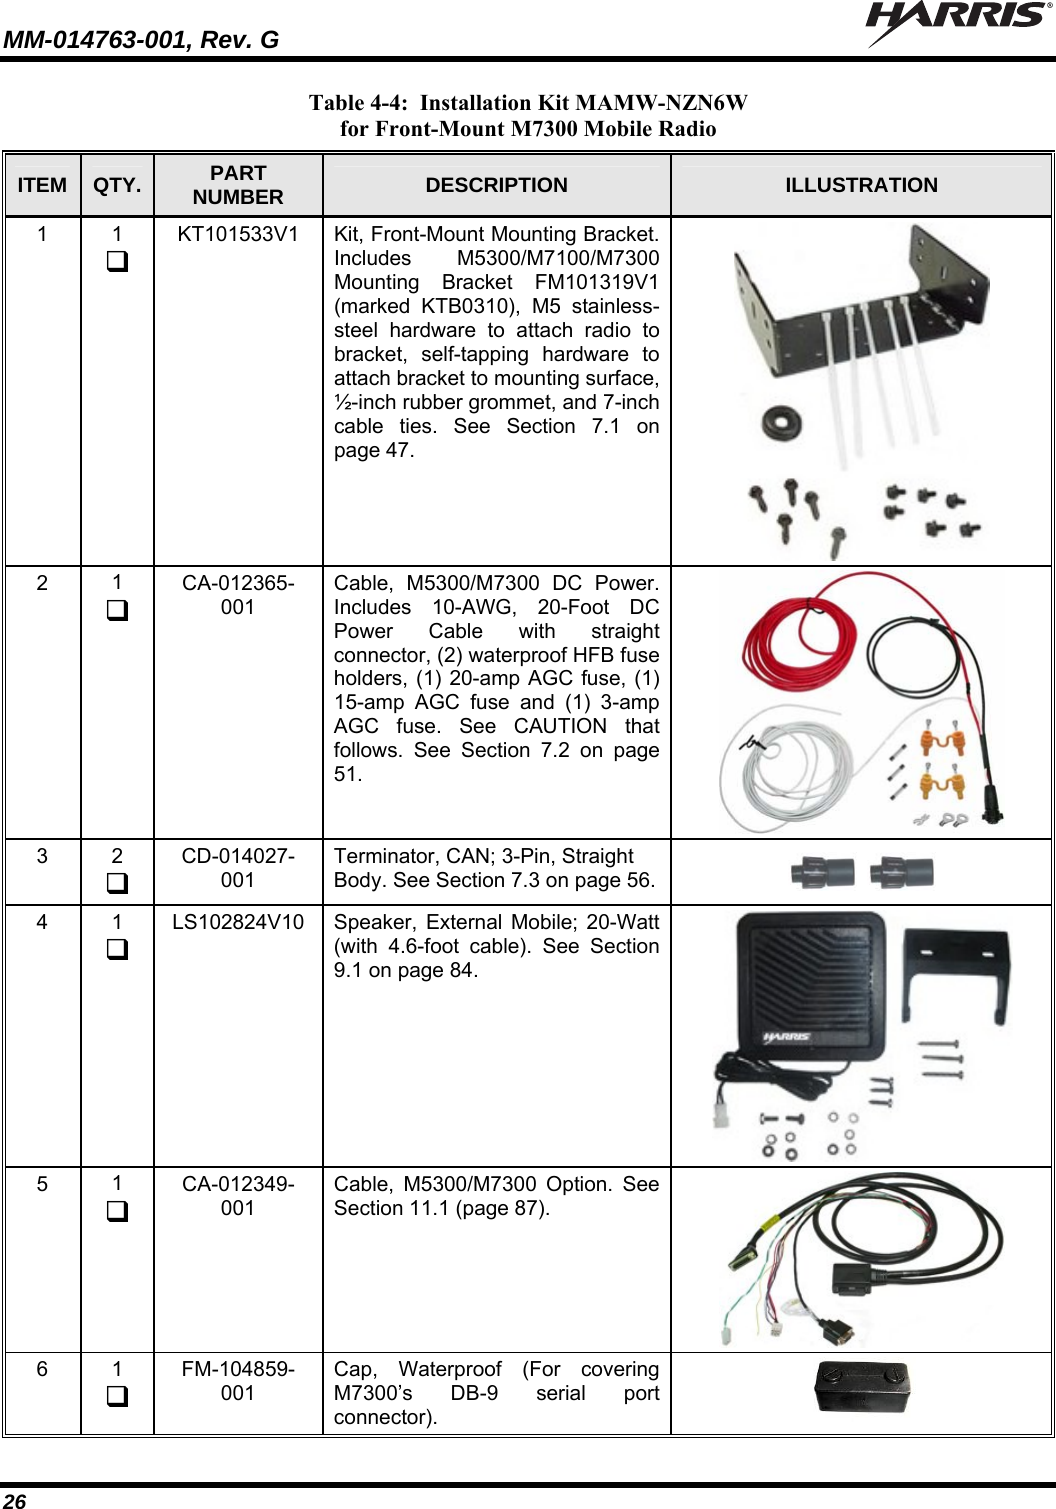 MM-014763-001, Rev. G   26 Table 4-4:  Installation Kit MAMW-NZN6W for Front-Mount M7300 Mobile Radio ITEM  QTY.  PART NUMBER  DESCRIPTION  ILLUSTRATION 1  1  KT101533V1  Kit, Front-Mount Mounting Bracket. Includes M5300/M7100/M7300 Mounting Bracket FM101319V1 (marked KTB0310), M5 stainless-steel hardware to attach radio to bracket, self-tapping hardware to attach bracket to mounting surface, ½-inch rubber grommet, and 7-inch cable ties. See Section 7.1 on page 47.  2  1  CA-012365-001 Cable, M5300/M7300 DC Power. Includes 10-AWG, 20-Foot DC Power Cable with straight connector, (2) waterproof HFB fuse holders, (1) 20-amp AGC fuse, (1) 15-amp AGC fuse and (1) 3-amp AGC fuse. See CAUTION that follows. See Section 7.2 on page 51.  3  2  CD-014027-001 Terminator, CAN; 3-Pin, Straight Body. See Section 7.3 on page 56.       4  1  LS102824V10  Speaker, External Mobile; 20-Watt (with 4.6-foot cable). See Section 9.1 on page 84.  5  1  CA-012349-001 Cable, M5300/M7300 Option. See Section 11.1 (page 87).  6  1  FM-104859-001 Cap, Waterproof (For covering M7300’s DB-9 serial port connector).    